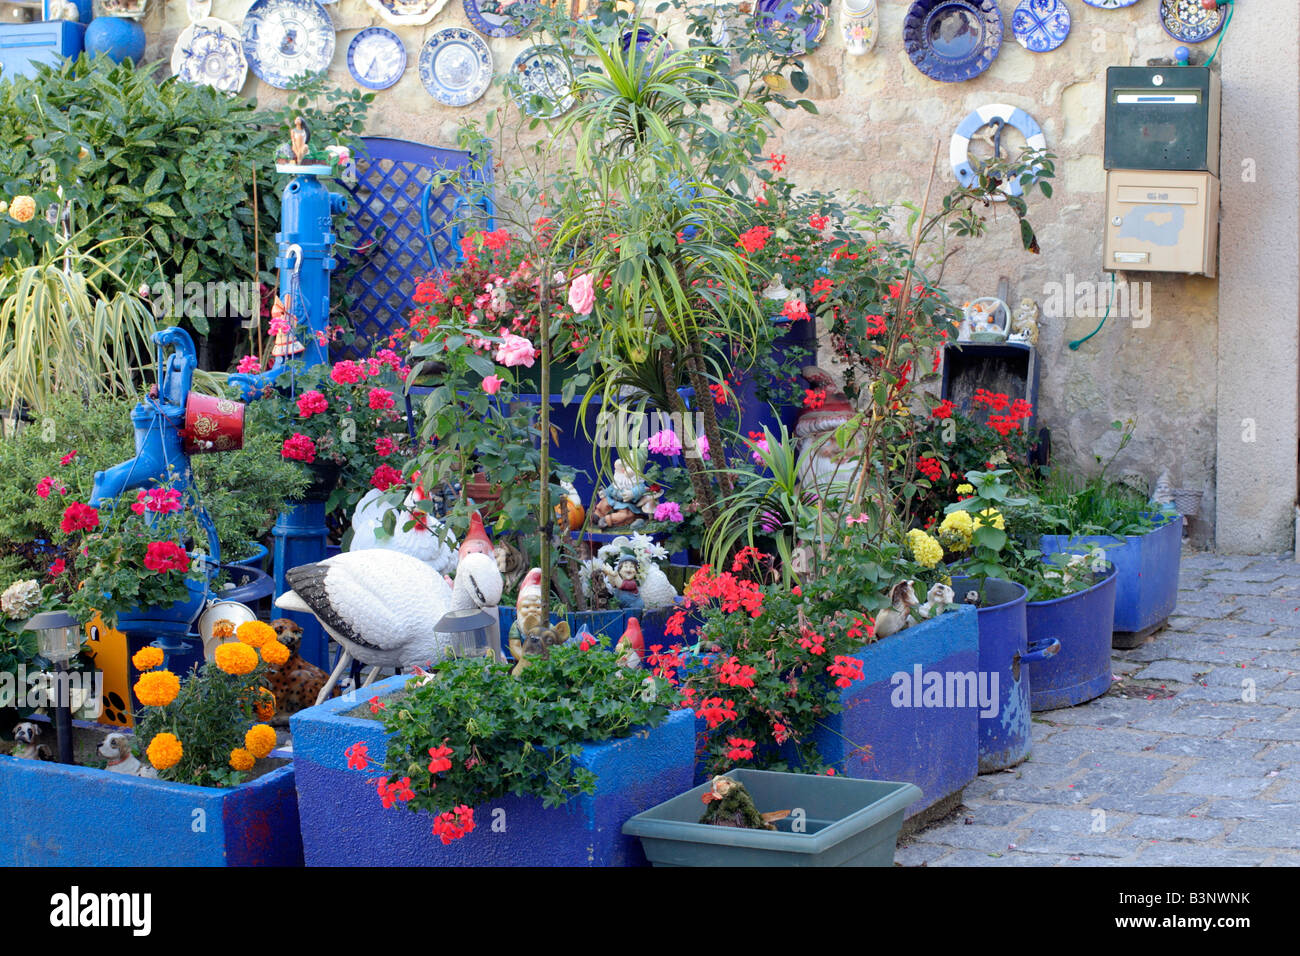 PLANTERS IN A COURTYARD ST AIGNAN LOIRE VALLEY FRANCE Stock Photo